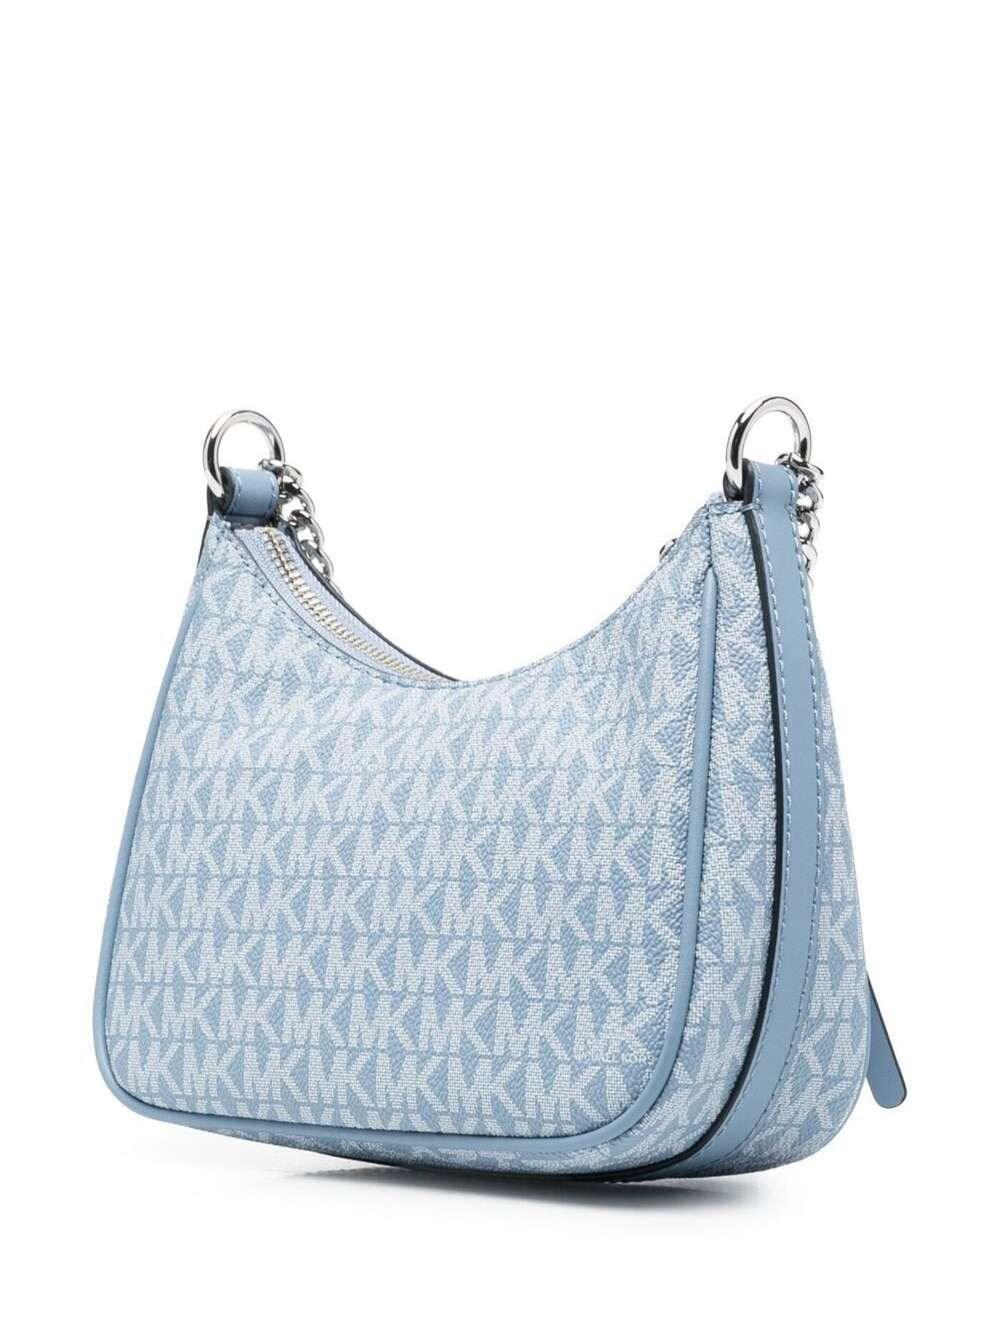 MICHAEL Michael Kors Handbag With Monogram M Michael Kors Light E In Waxed  Canvas With Silver Chain Shoulder Strap in Blue